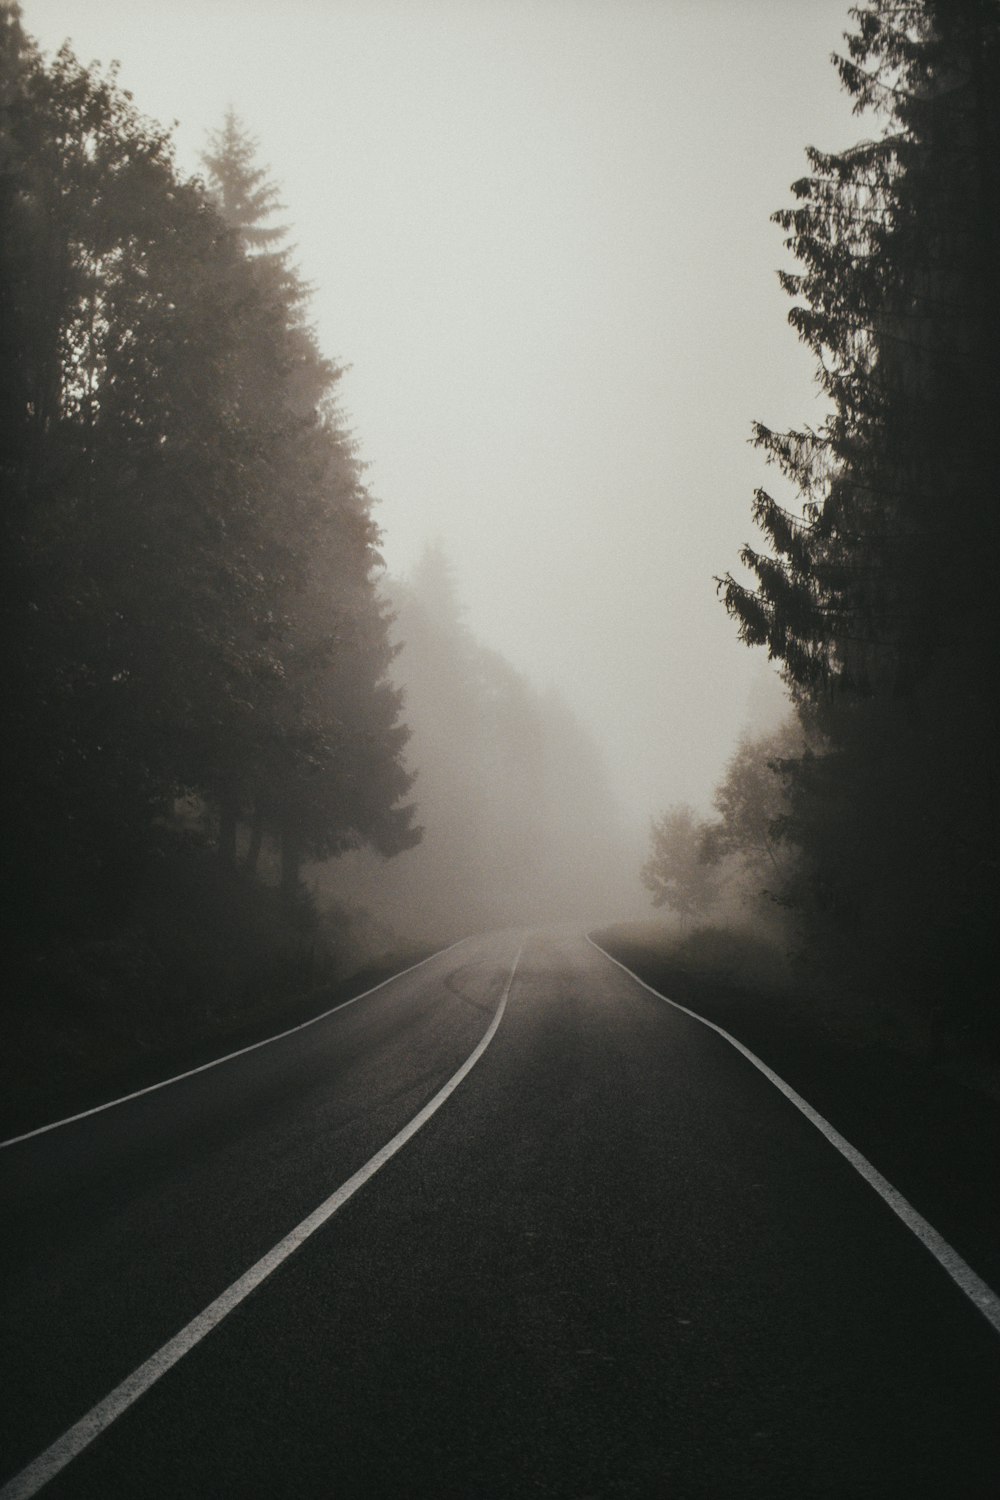 black asphalt road between green trees covered with fog during daytime